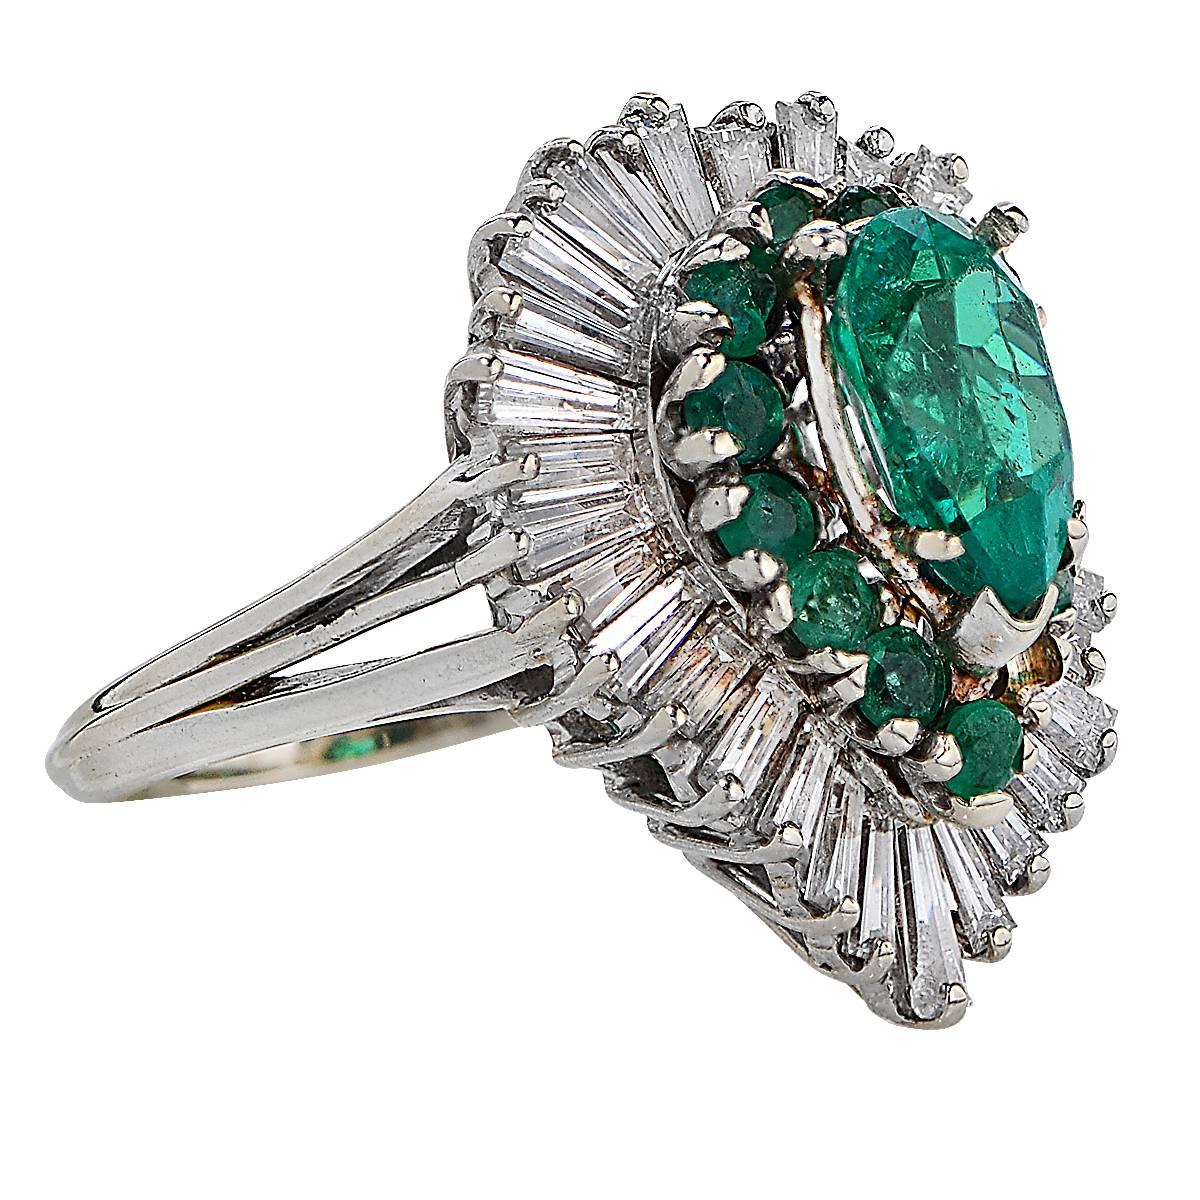 Ballerina Ring Containing a 1.57 Carat Fine Colombian Emerald Surrounded by 13 Round Emeralds .85 Carats and 32 Baguette Cut Diamonds Approximately 2.50 Carats, G Color, VS Clarity. Ring Size is 5.5.